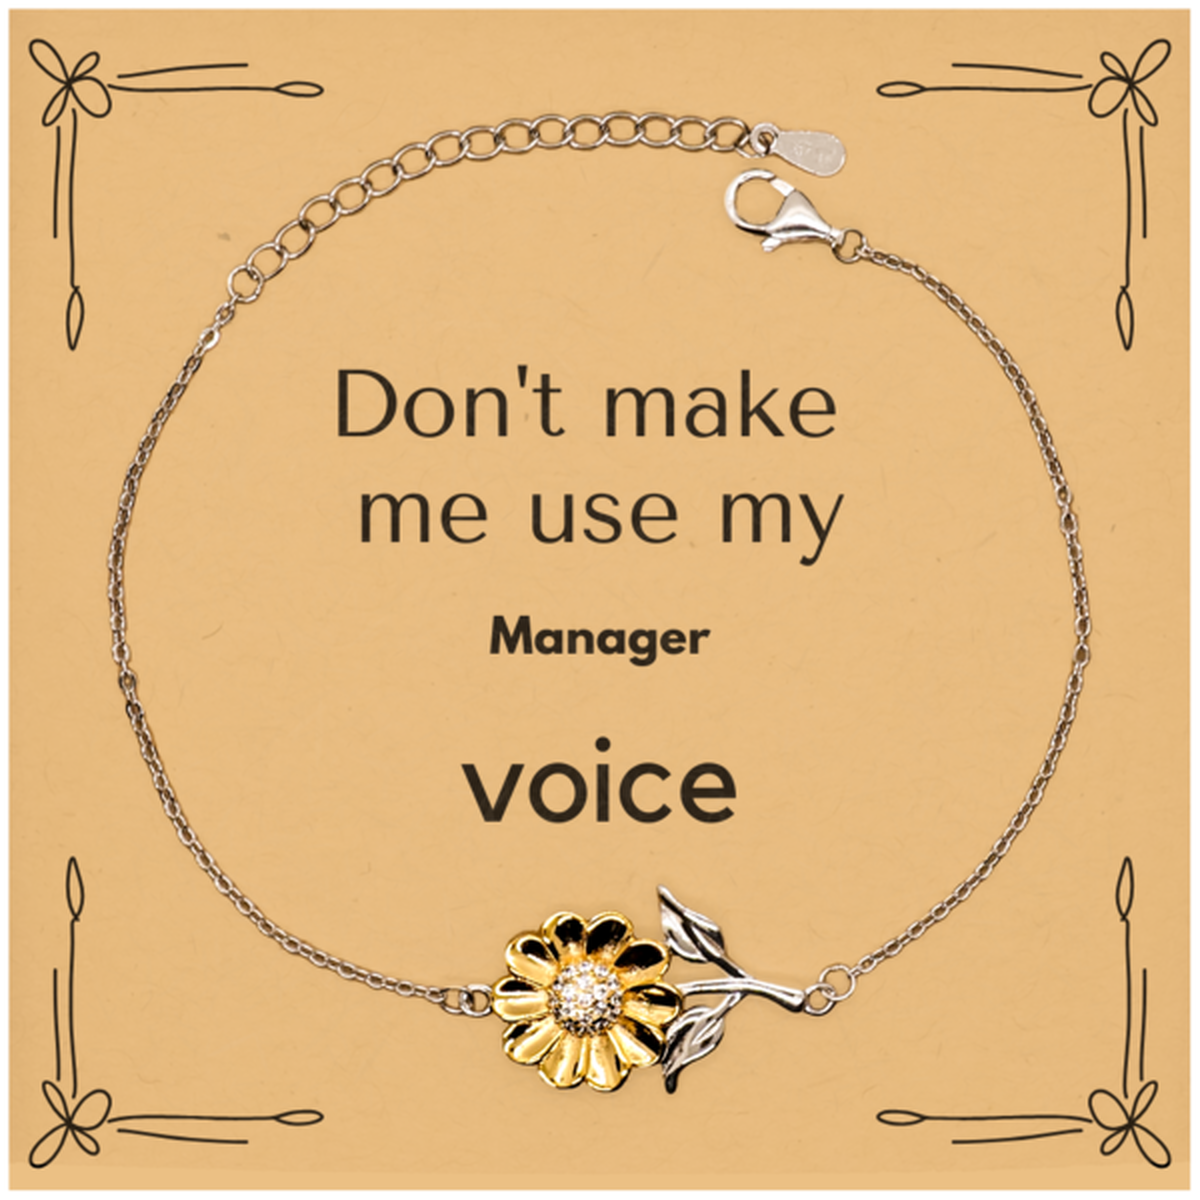 Don't make me use my Manager voice, Sarcasm Manager Card Gifts, Christmas Manager Sunflower Bracelet Birthday Unique Gifts For Manager Coworkers, Men, Women, Colleague, Friends